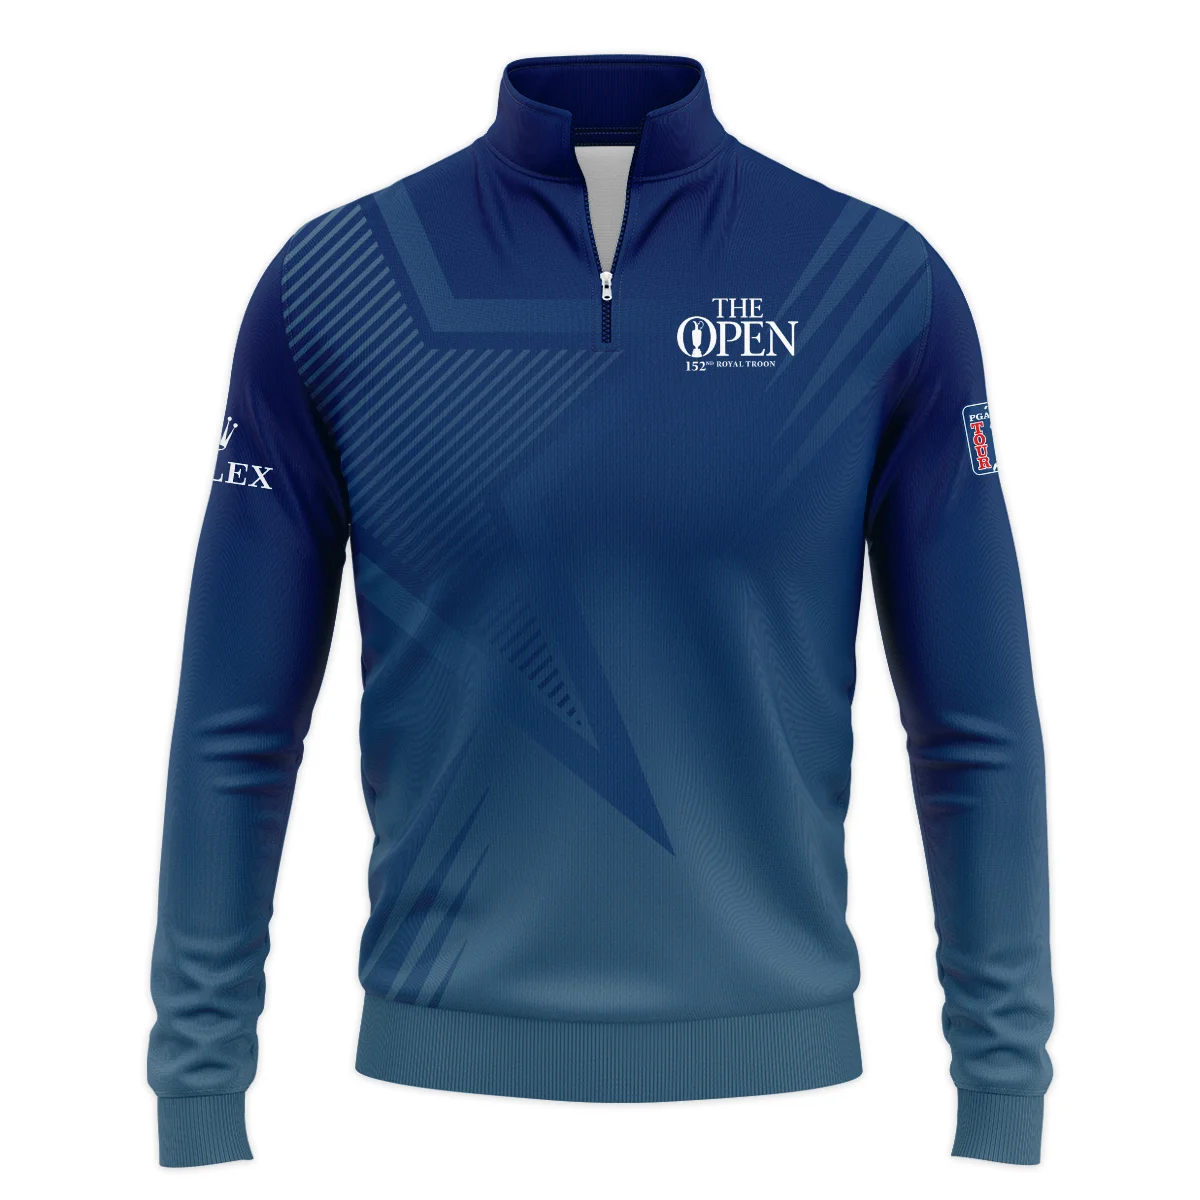 Rolex 152nd Open Championship Abstract Background Dark Blue Gradient Star Line Quarter-Zip Jacket All Over Prints HOTOP260624A04ROXSWZ